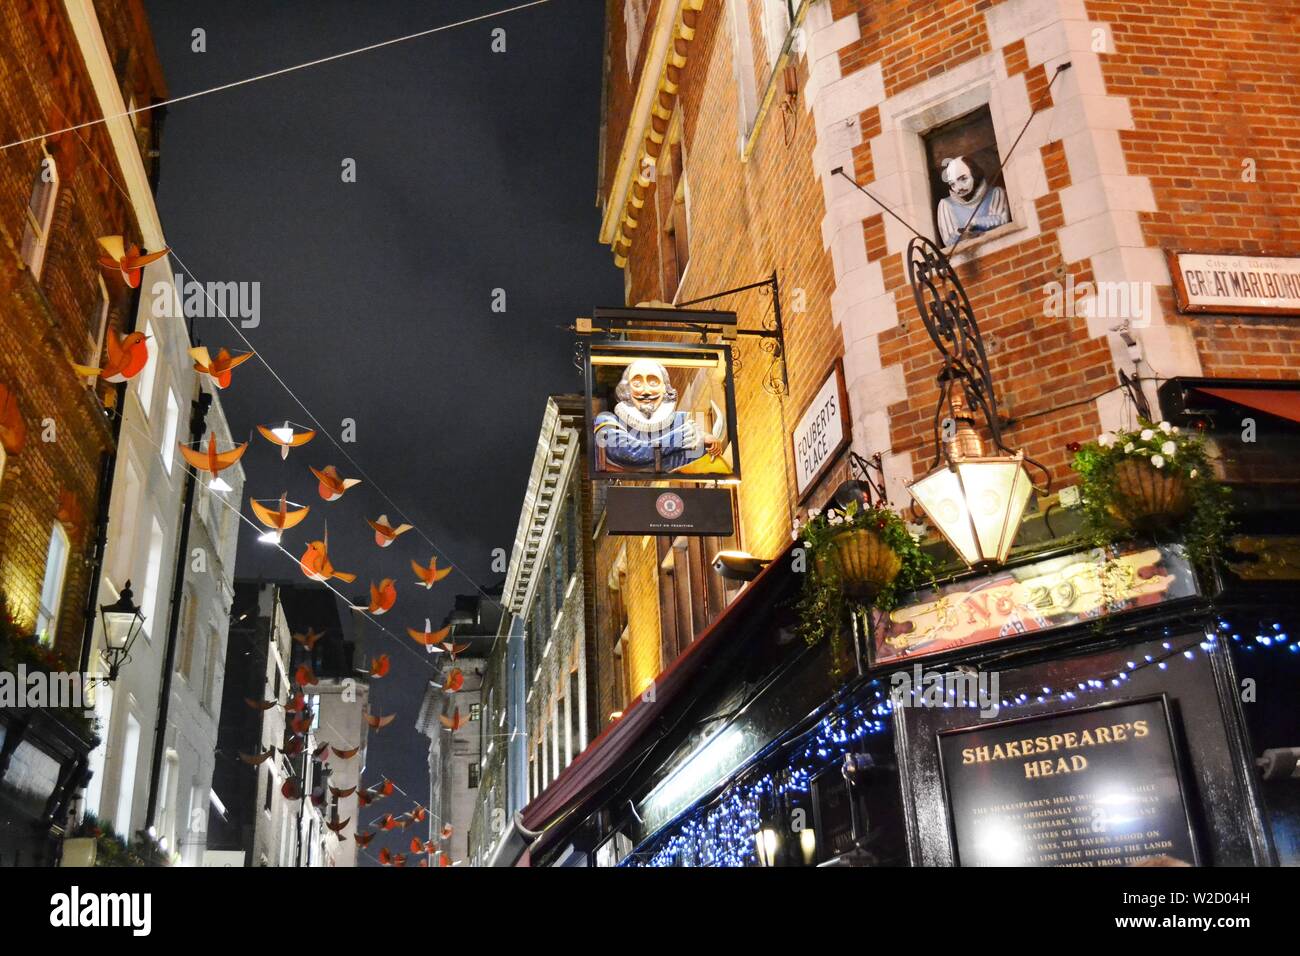 London/UK - November 28, 2013: Close-up view Shakespeare's head pub in the Carnaby street decorated for Christmas with red birds to feel happiness. Stock Photo